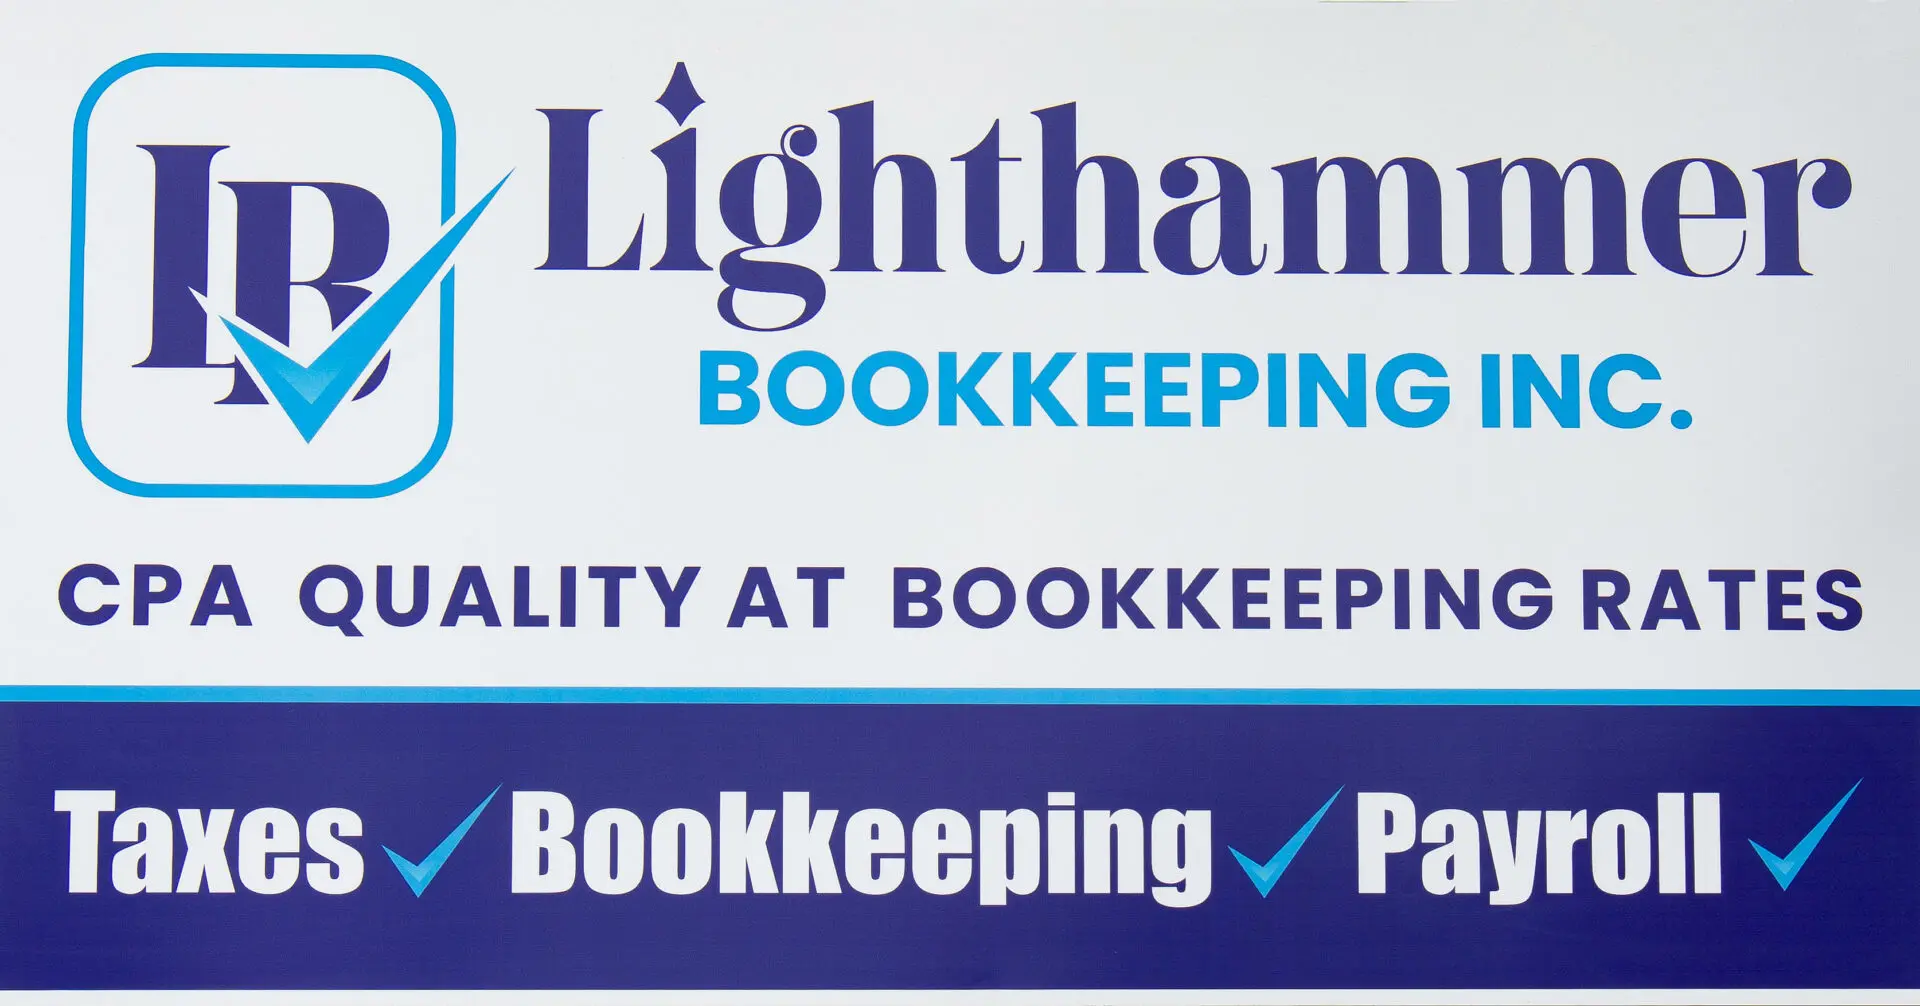 A bookkeeping company logo and sign.